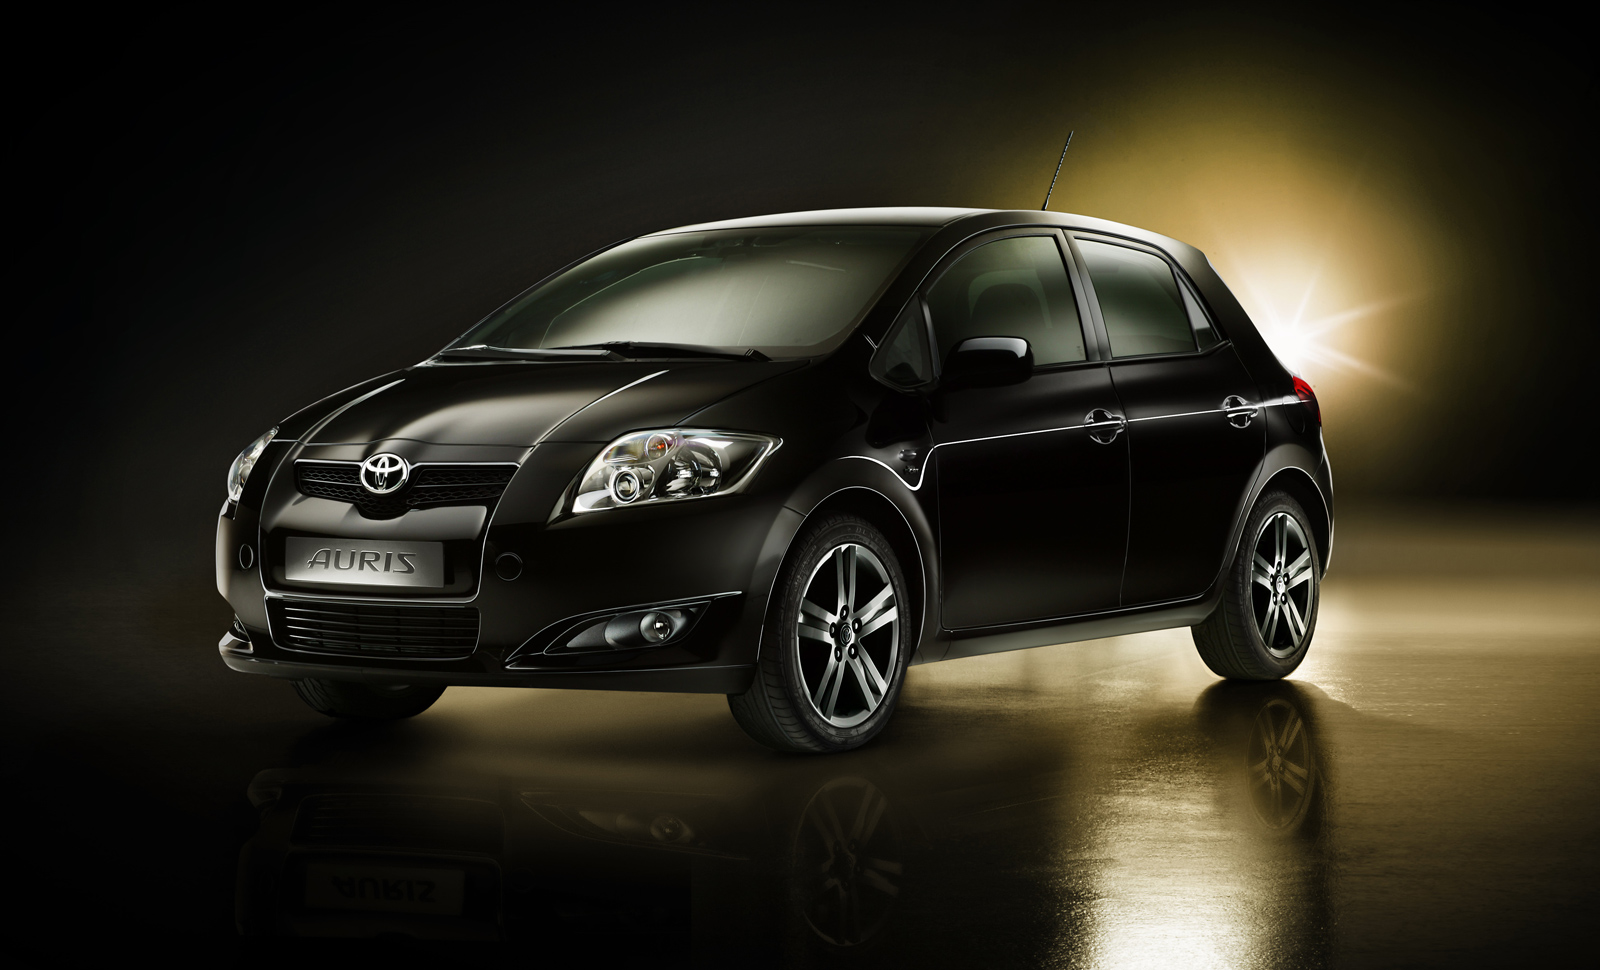 Toyota Auris 2008 🚘 Review Pictures and Images Look at the car